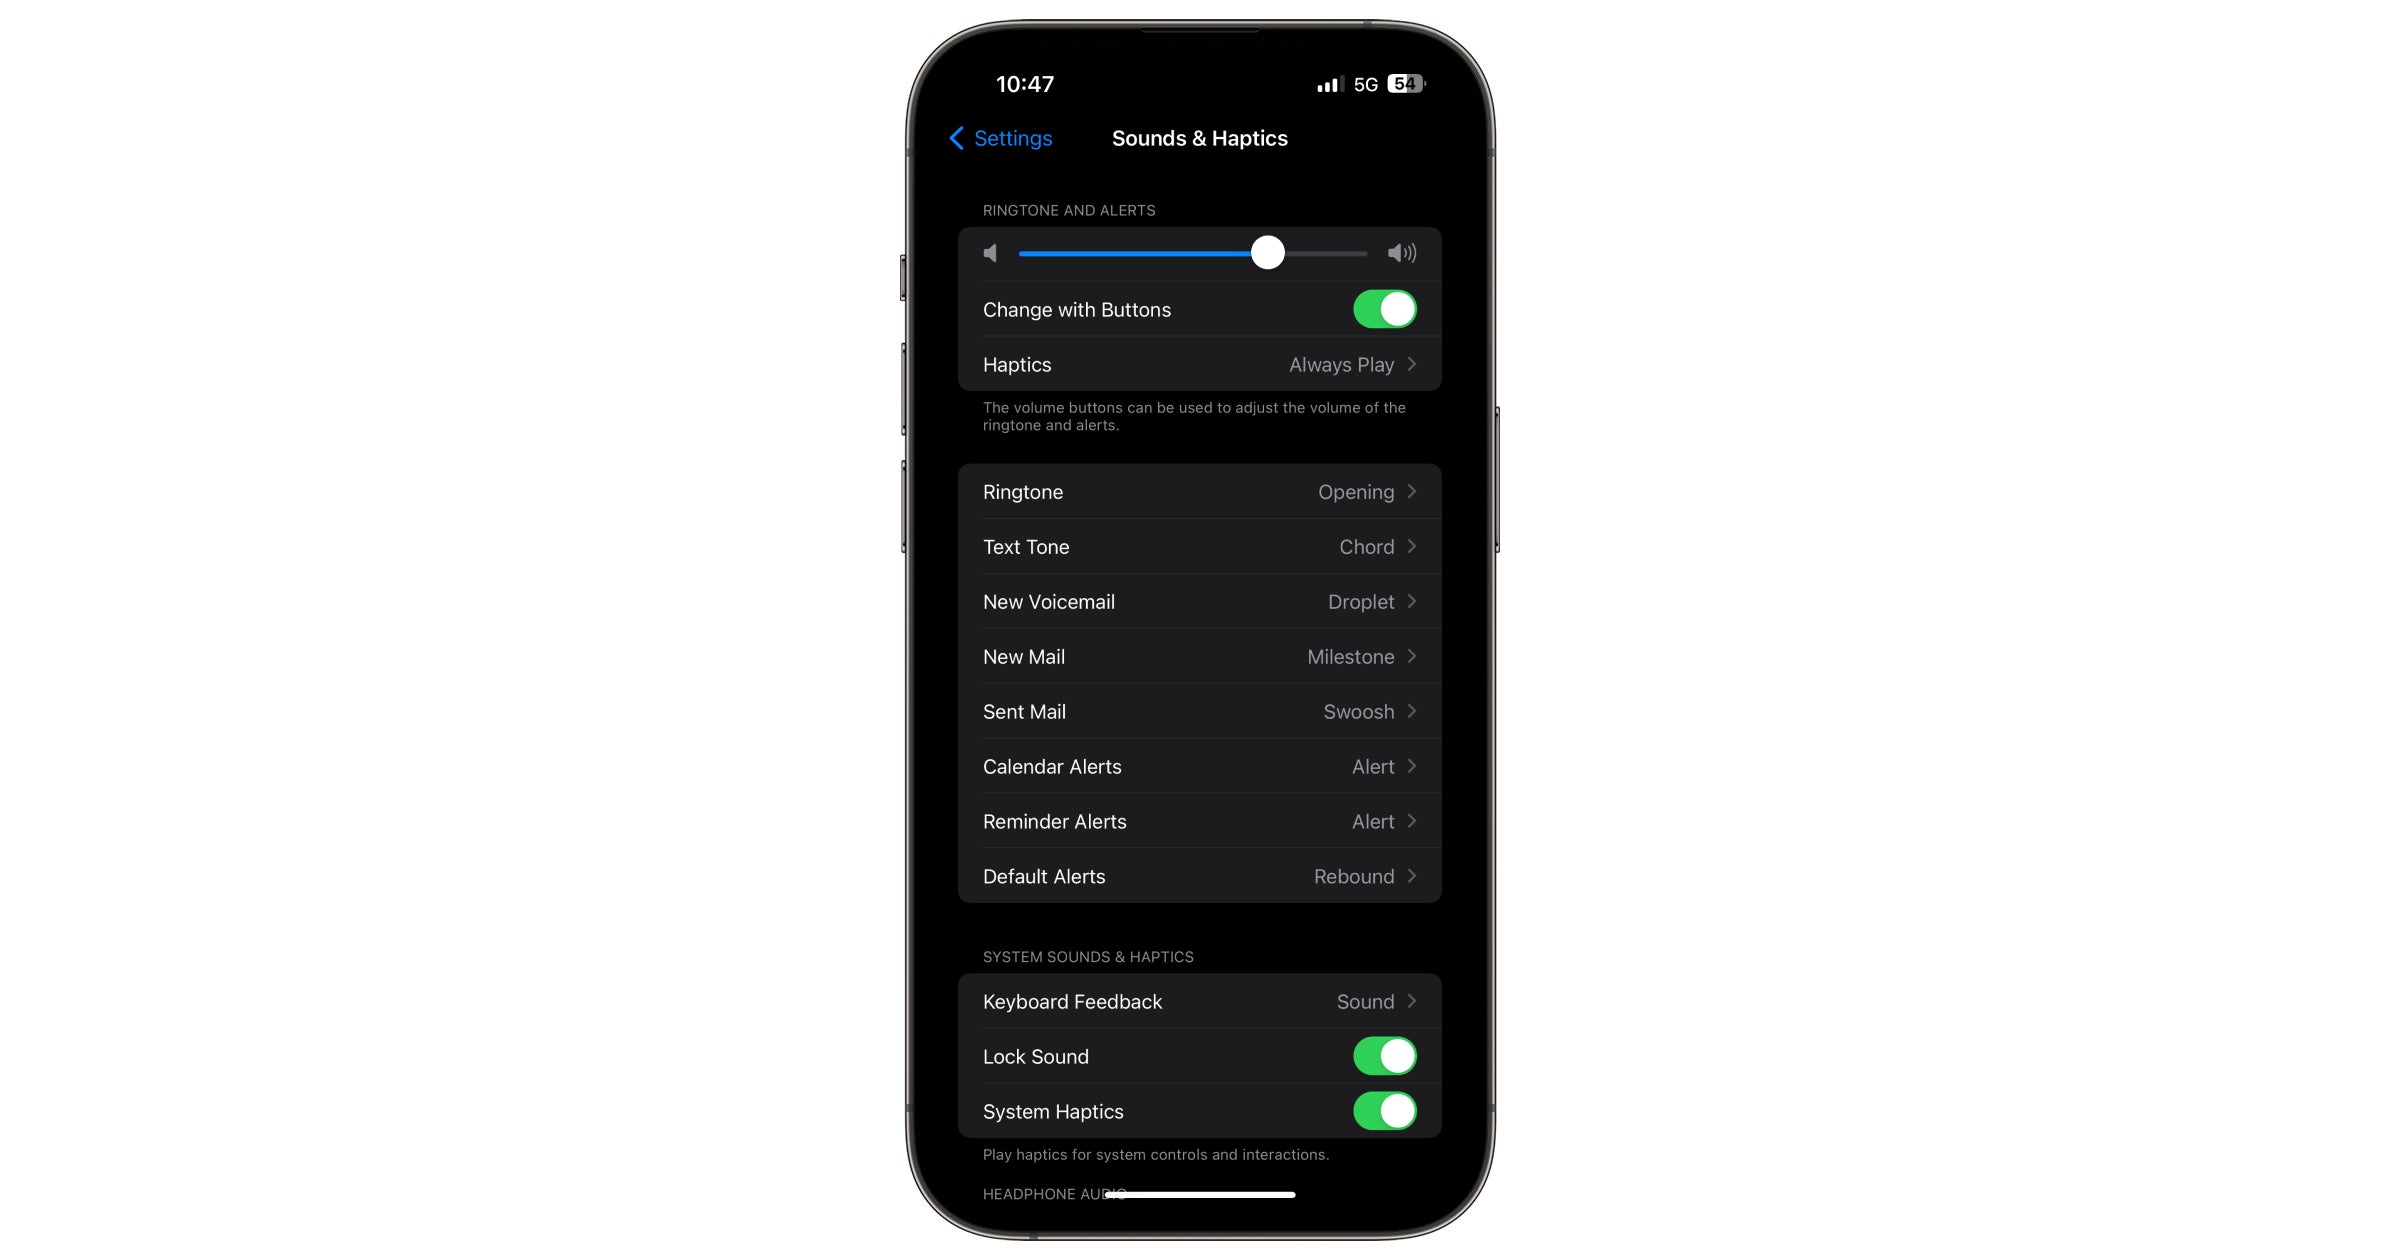 iPhone Settings showing Sound and Haptics